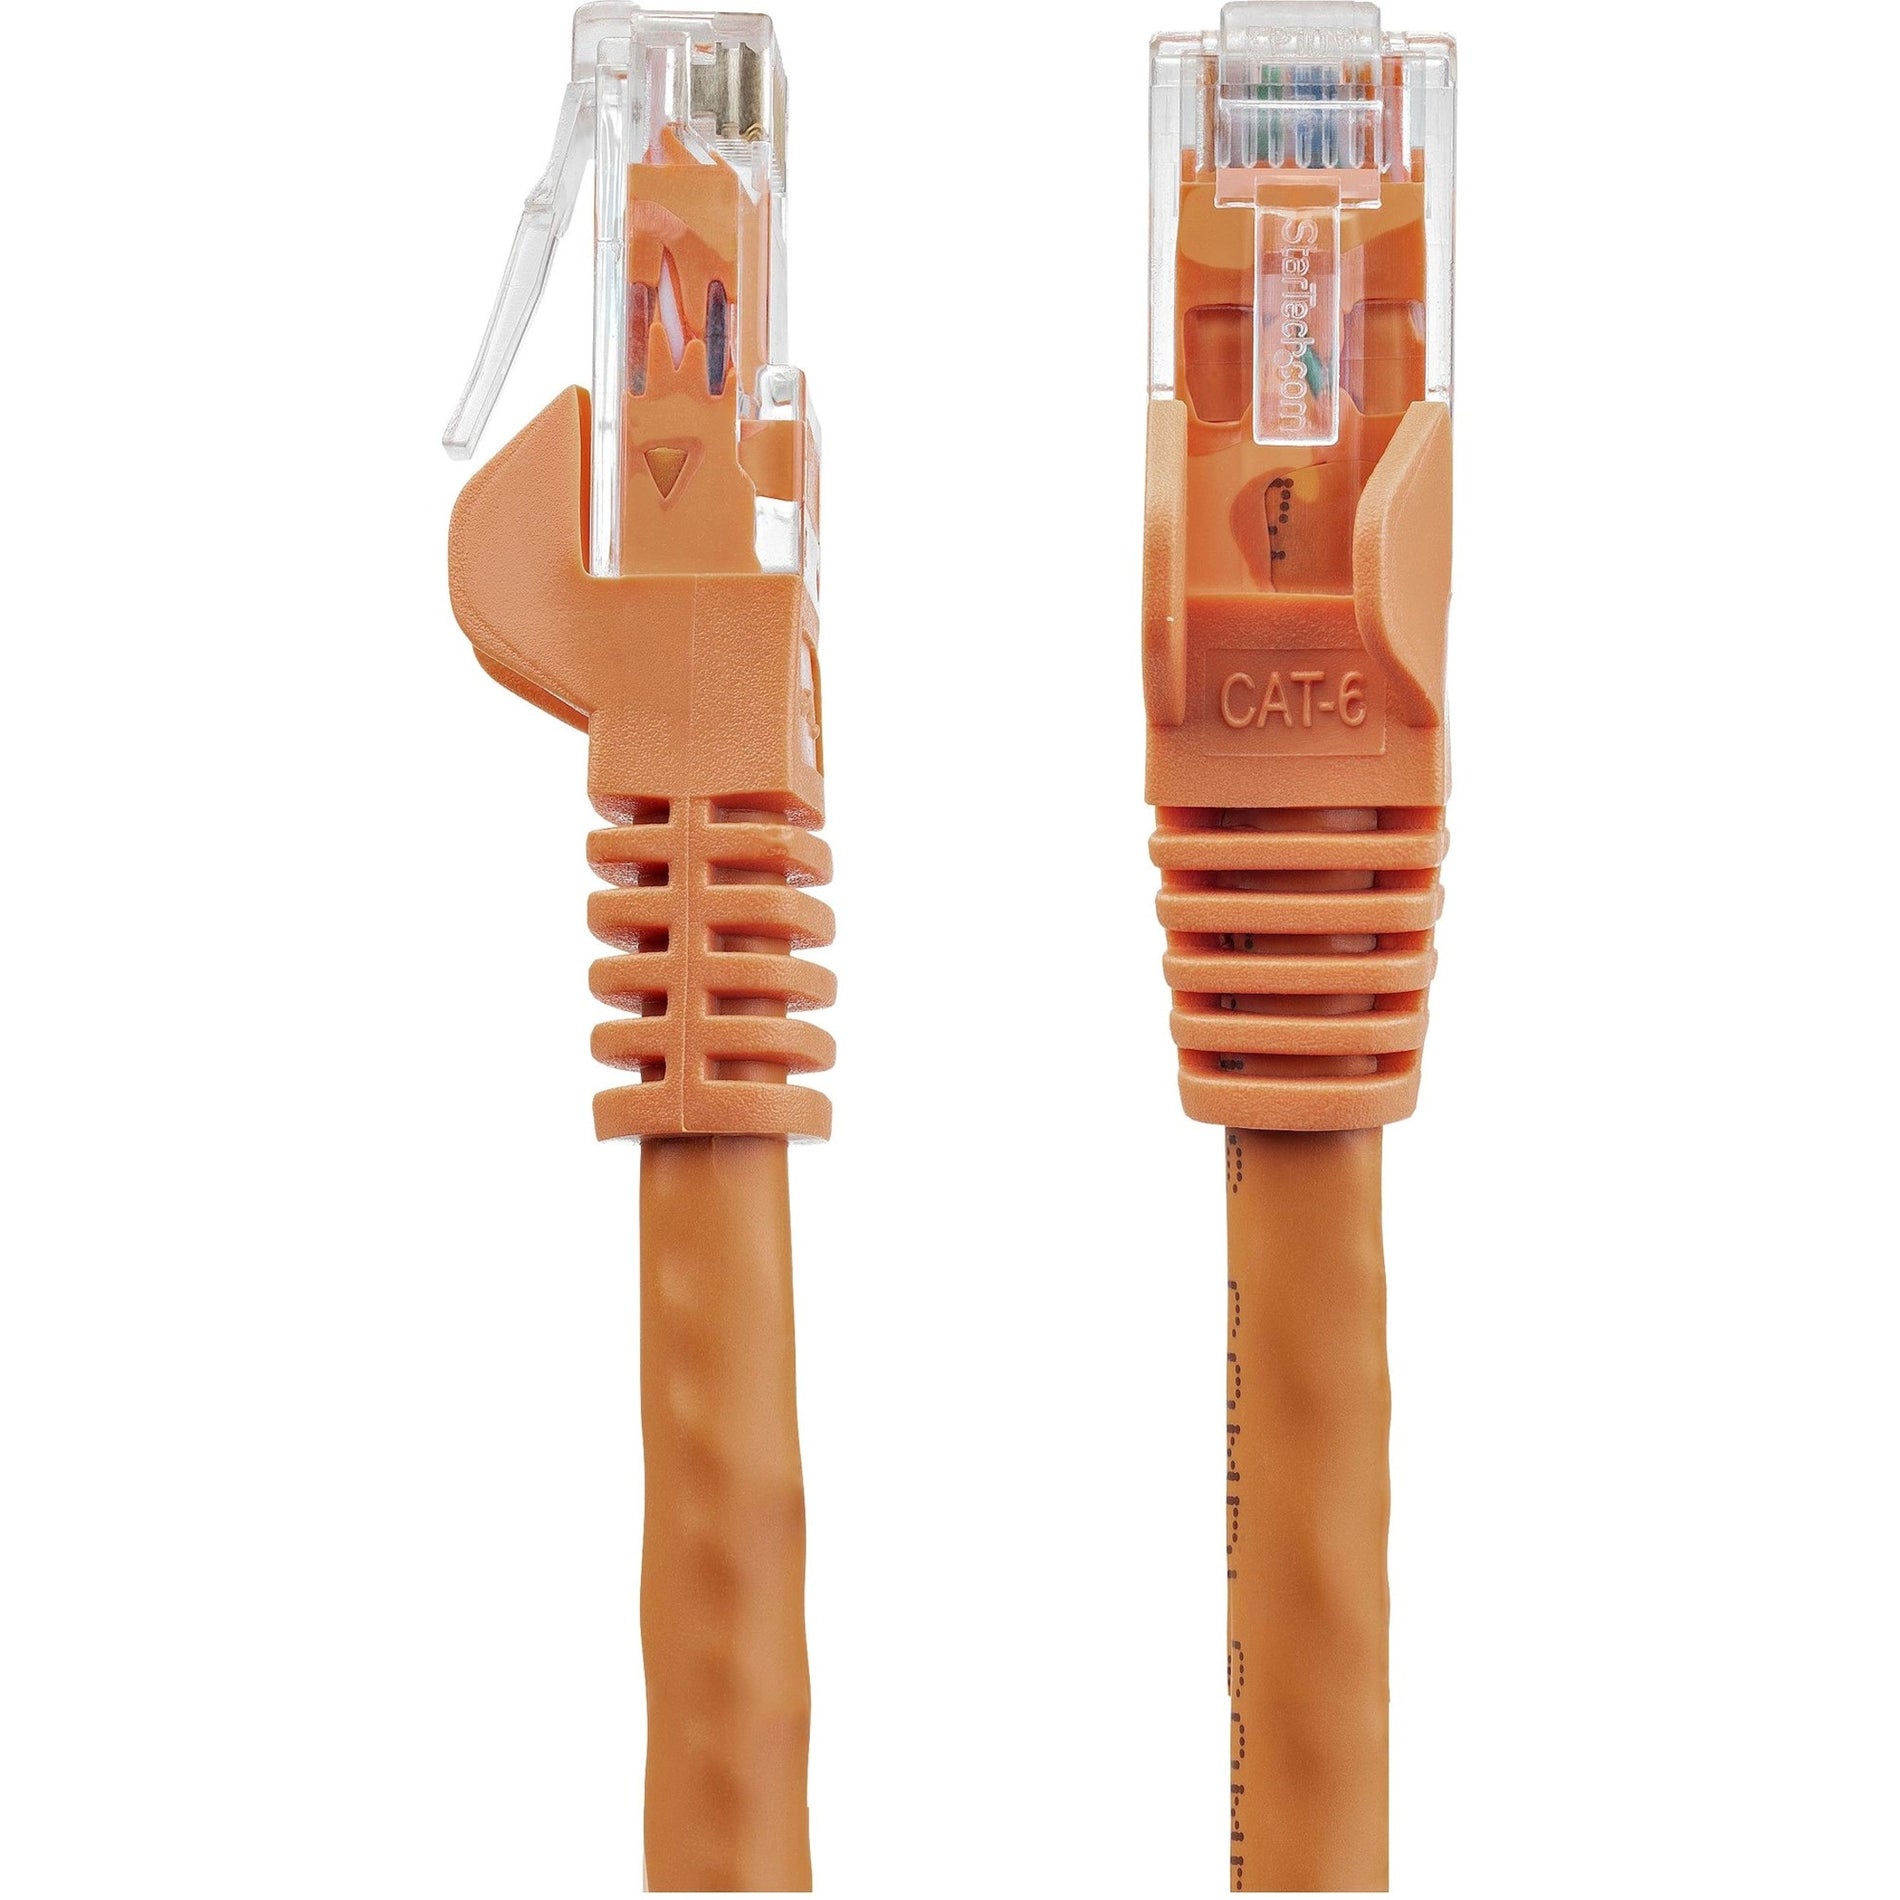 StarTech.com N6PATCH2OR Cat. 6 Network Cable, 2ft Orange Ethernet Cable, Snagless RJ45 Connectors